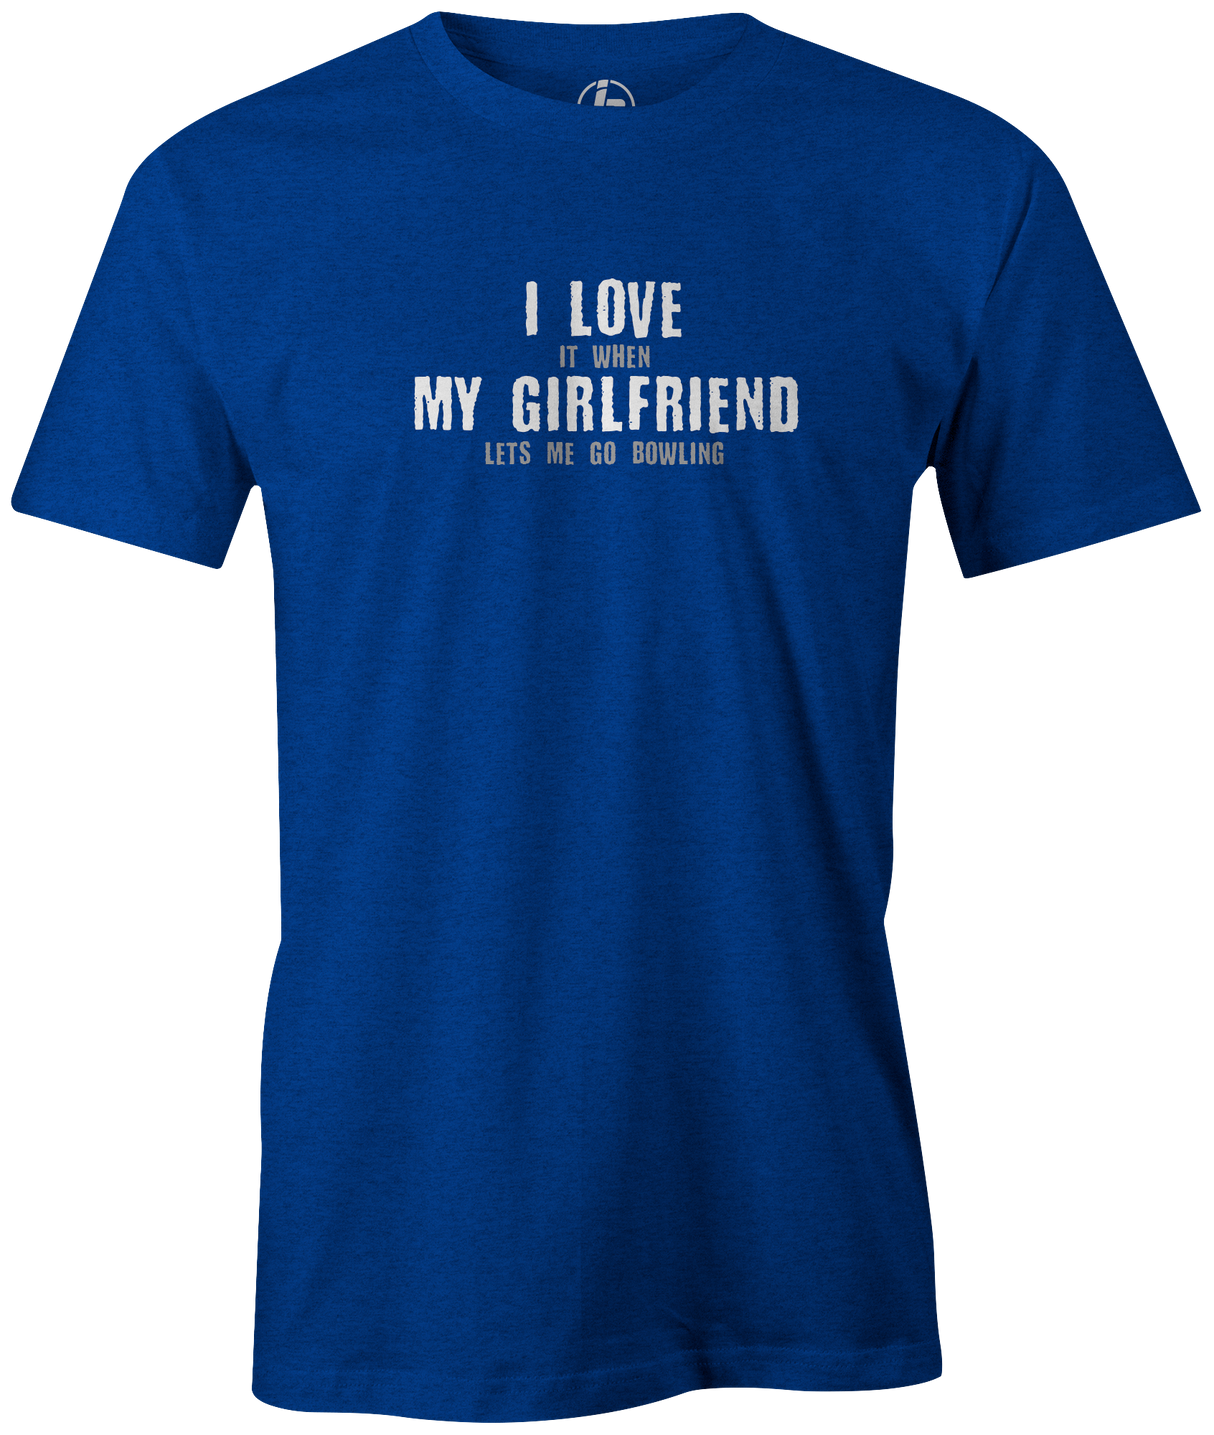 It's always nice to have someone who respects your bowling time. Rock this sharp Bowling girlfriend t-shirt and show the world how cool she is. This tee is the perfect gift. black, navy or charcoal. gift, birthday present. charcoal, navy, blue. tees, discount, cheap, free shipping. coupon code. discount. blue